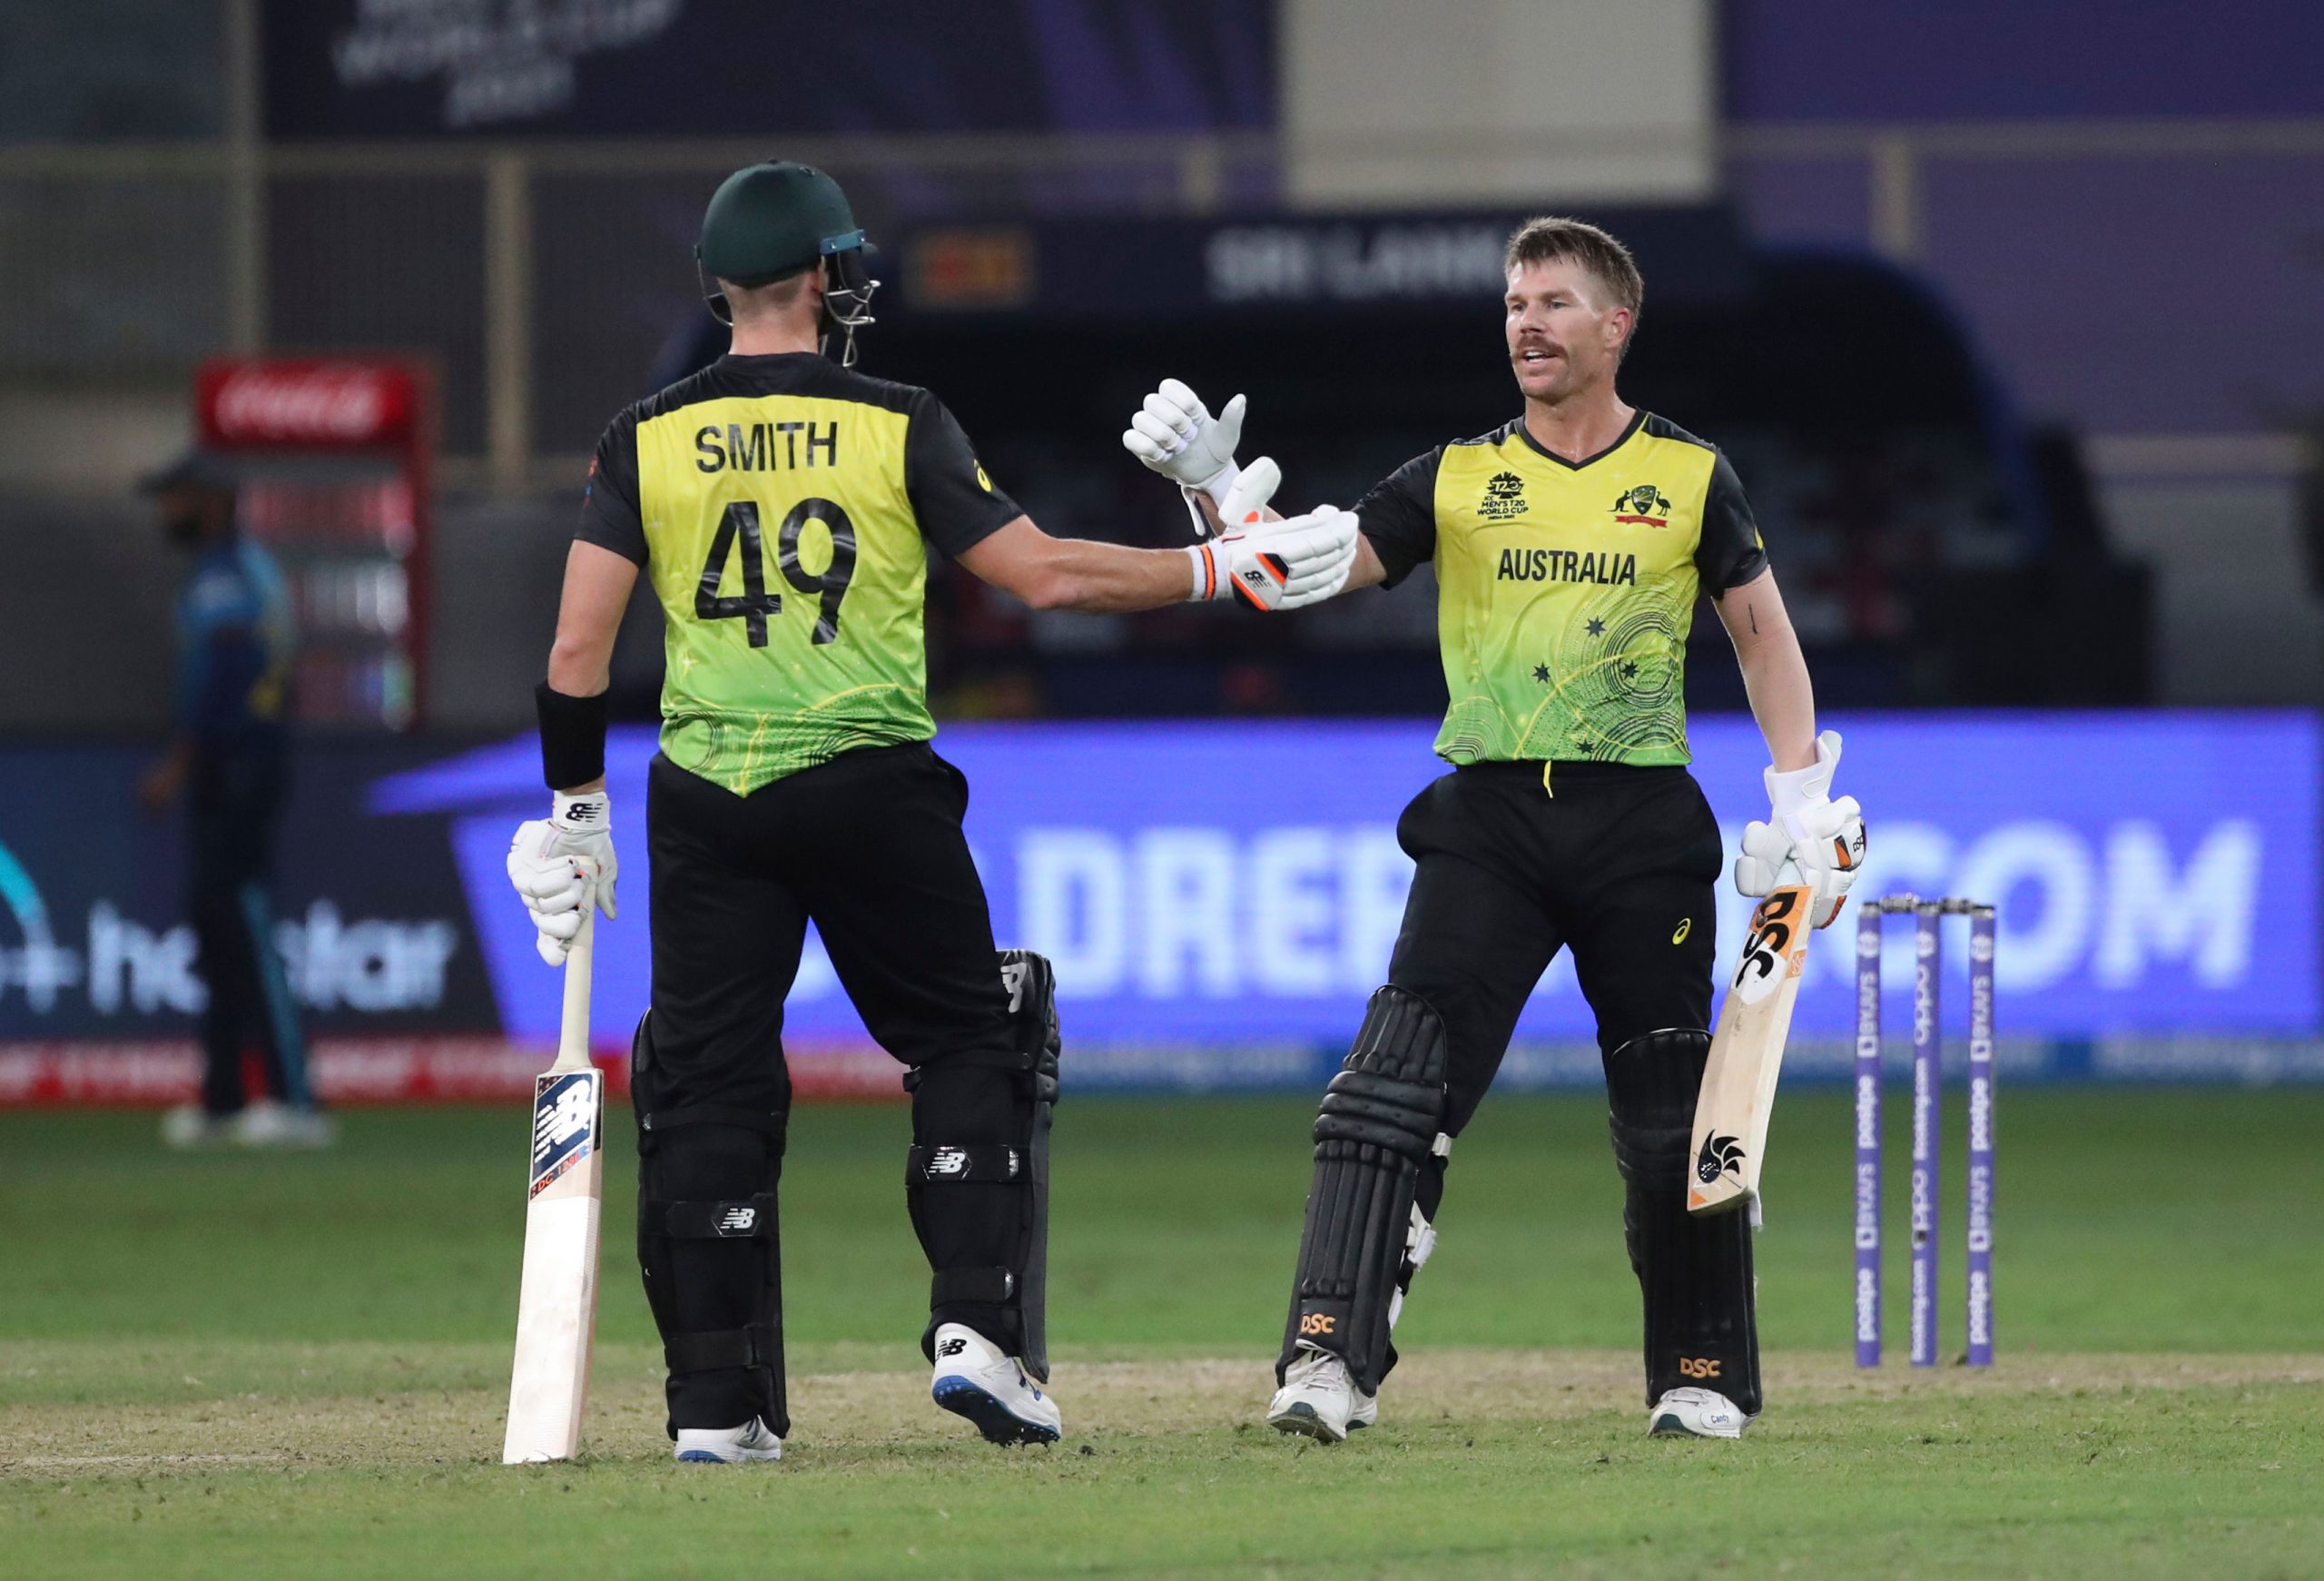 T20 World Cup, England vs Australia: When and where to watch live telecast, streaming